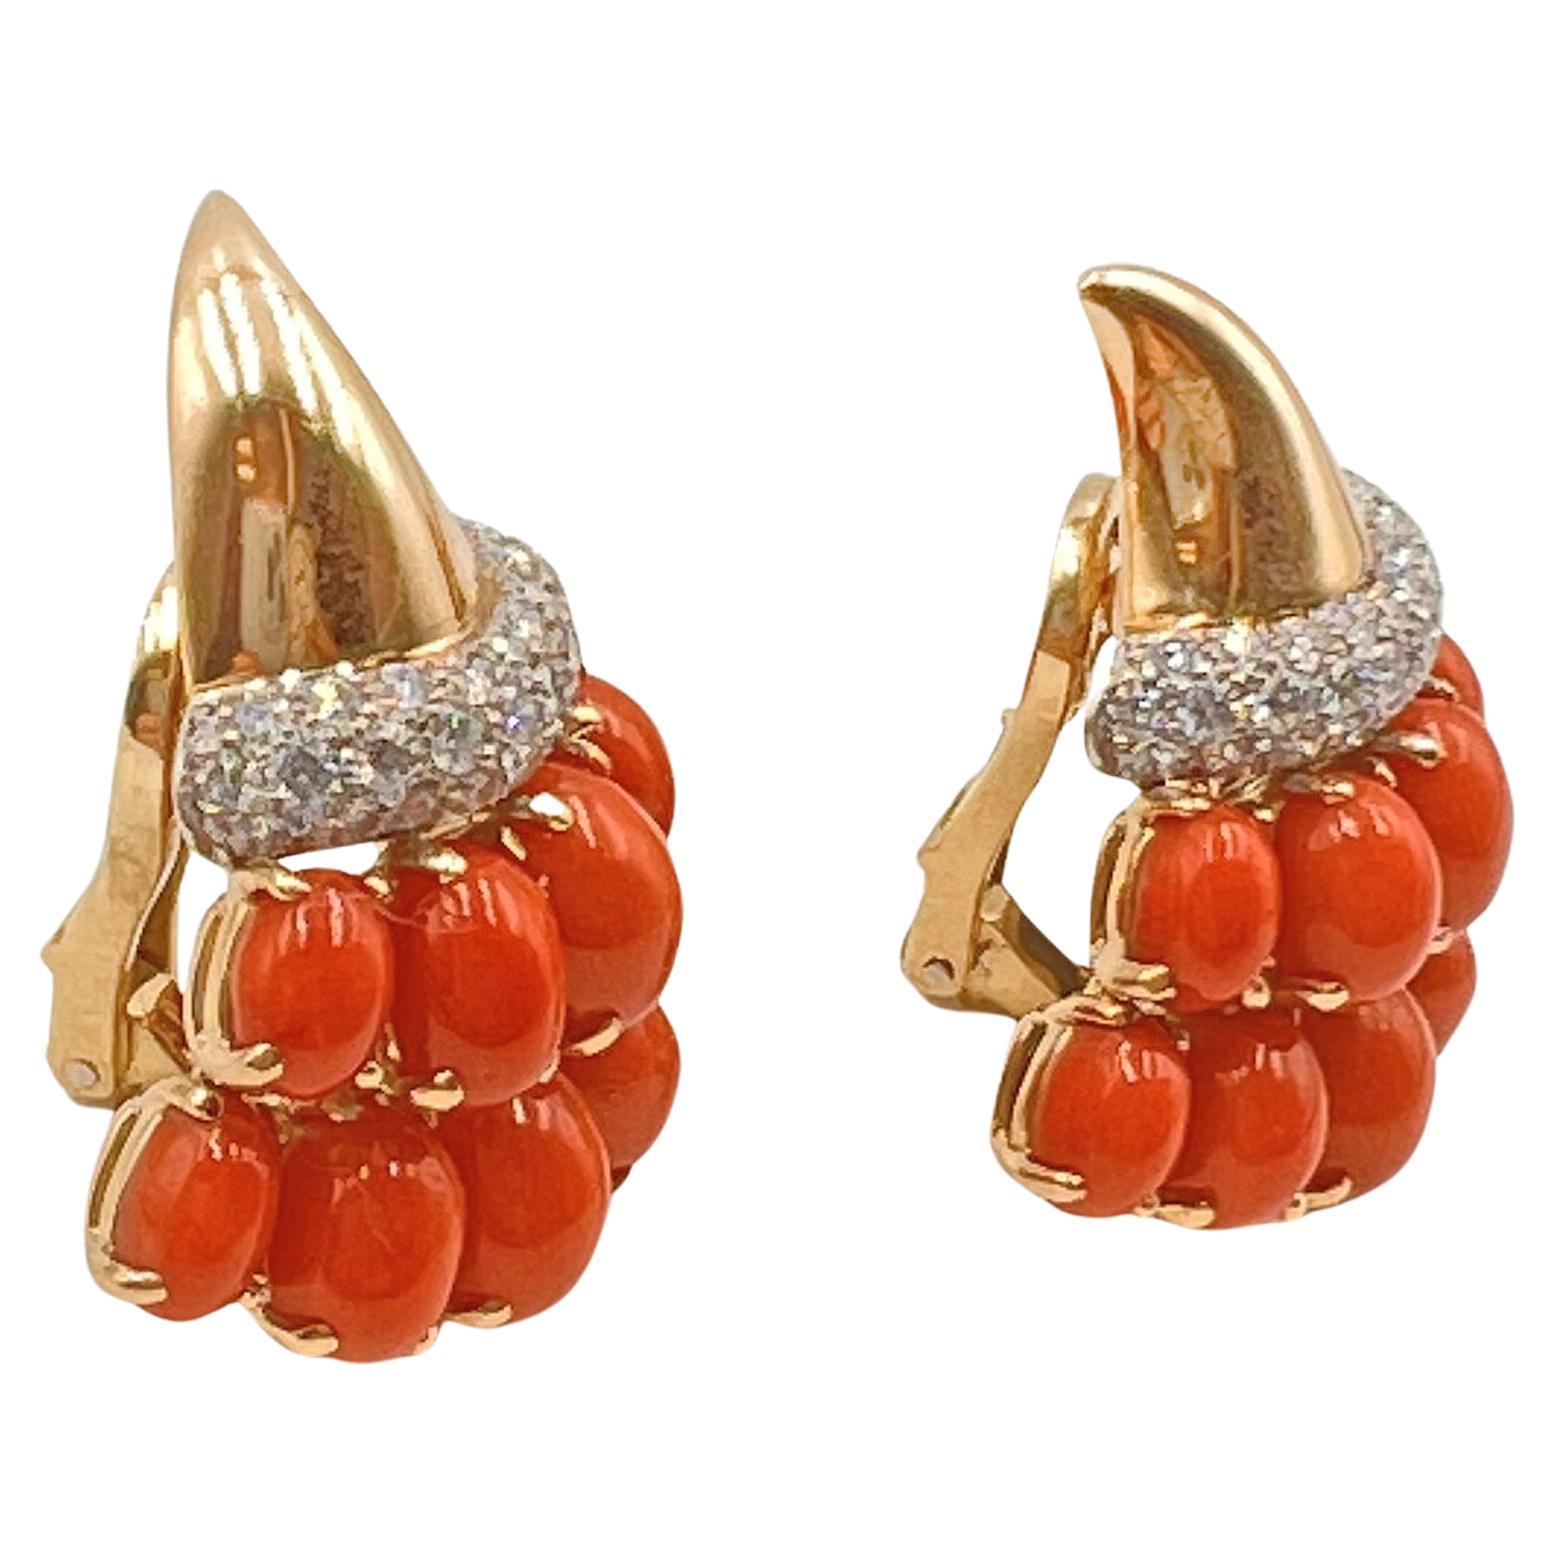 Cornucopia design earrings by Verdura in 18k yellow gold and platinum set with coral and diamonds.  Polished gold tops with a central platinum rim which is pave-set with sixty-six round brilliant-cut diamonds weighing approximately 1.32 total